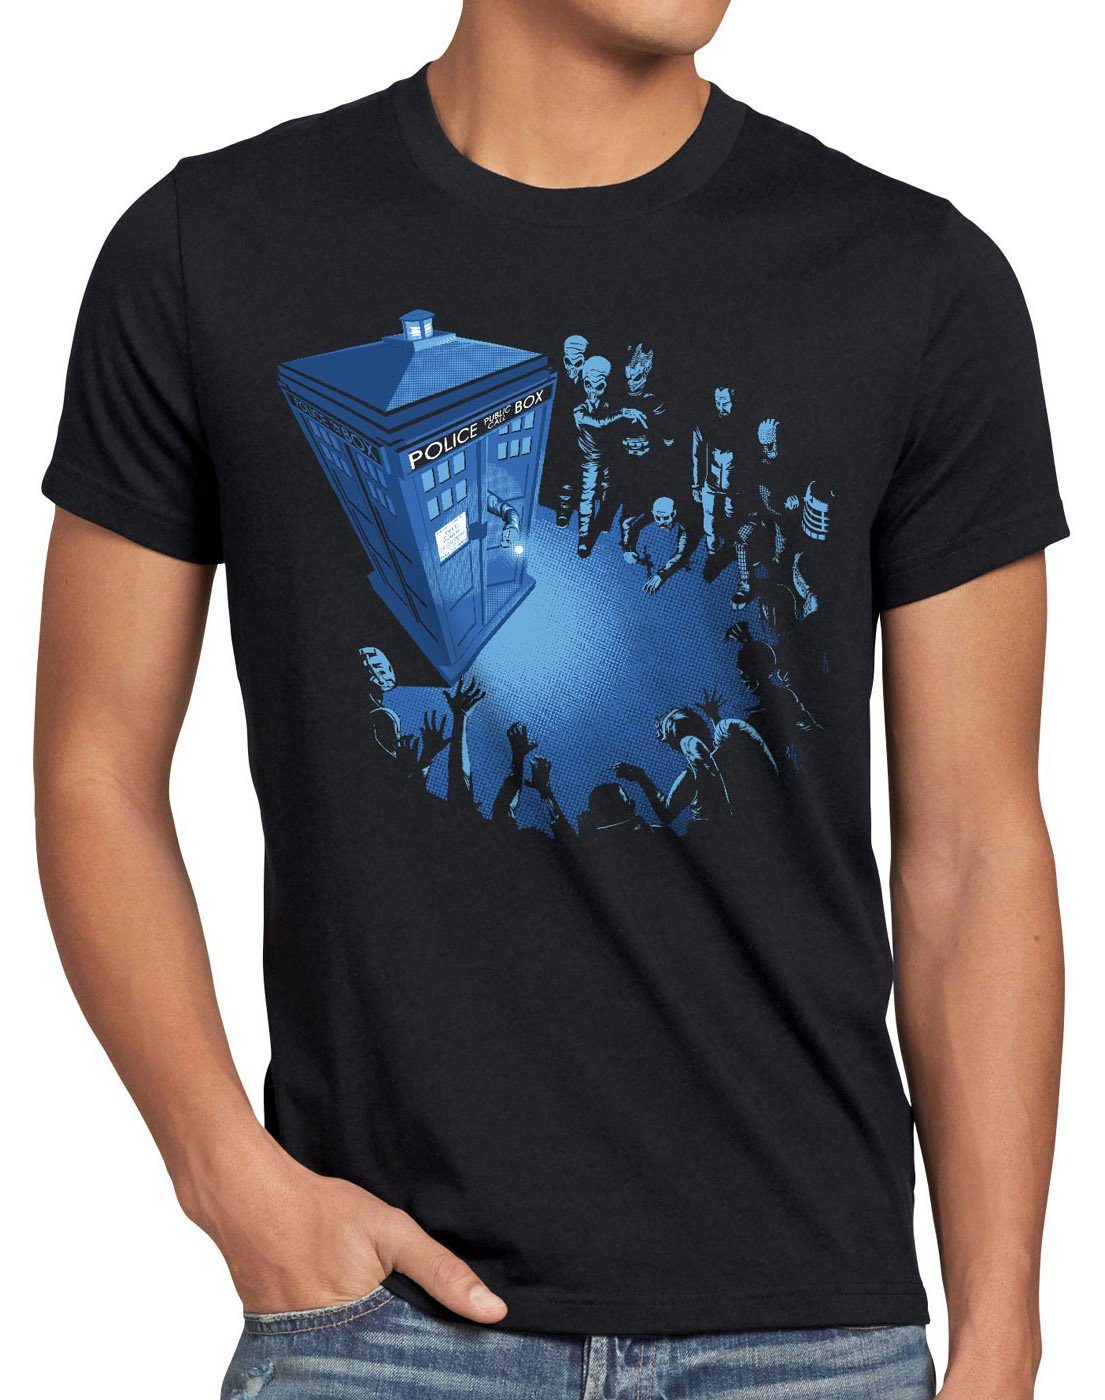 style3 Print-Shirt Herren T-Shirt Who Notrufzelle who police doctor dalek tardis box time space dr